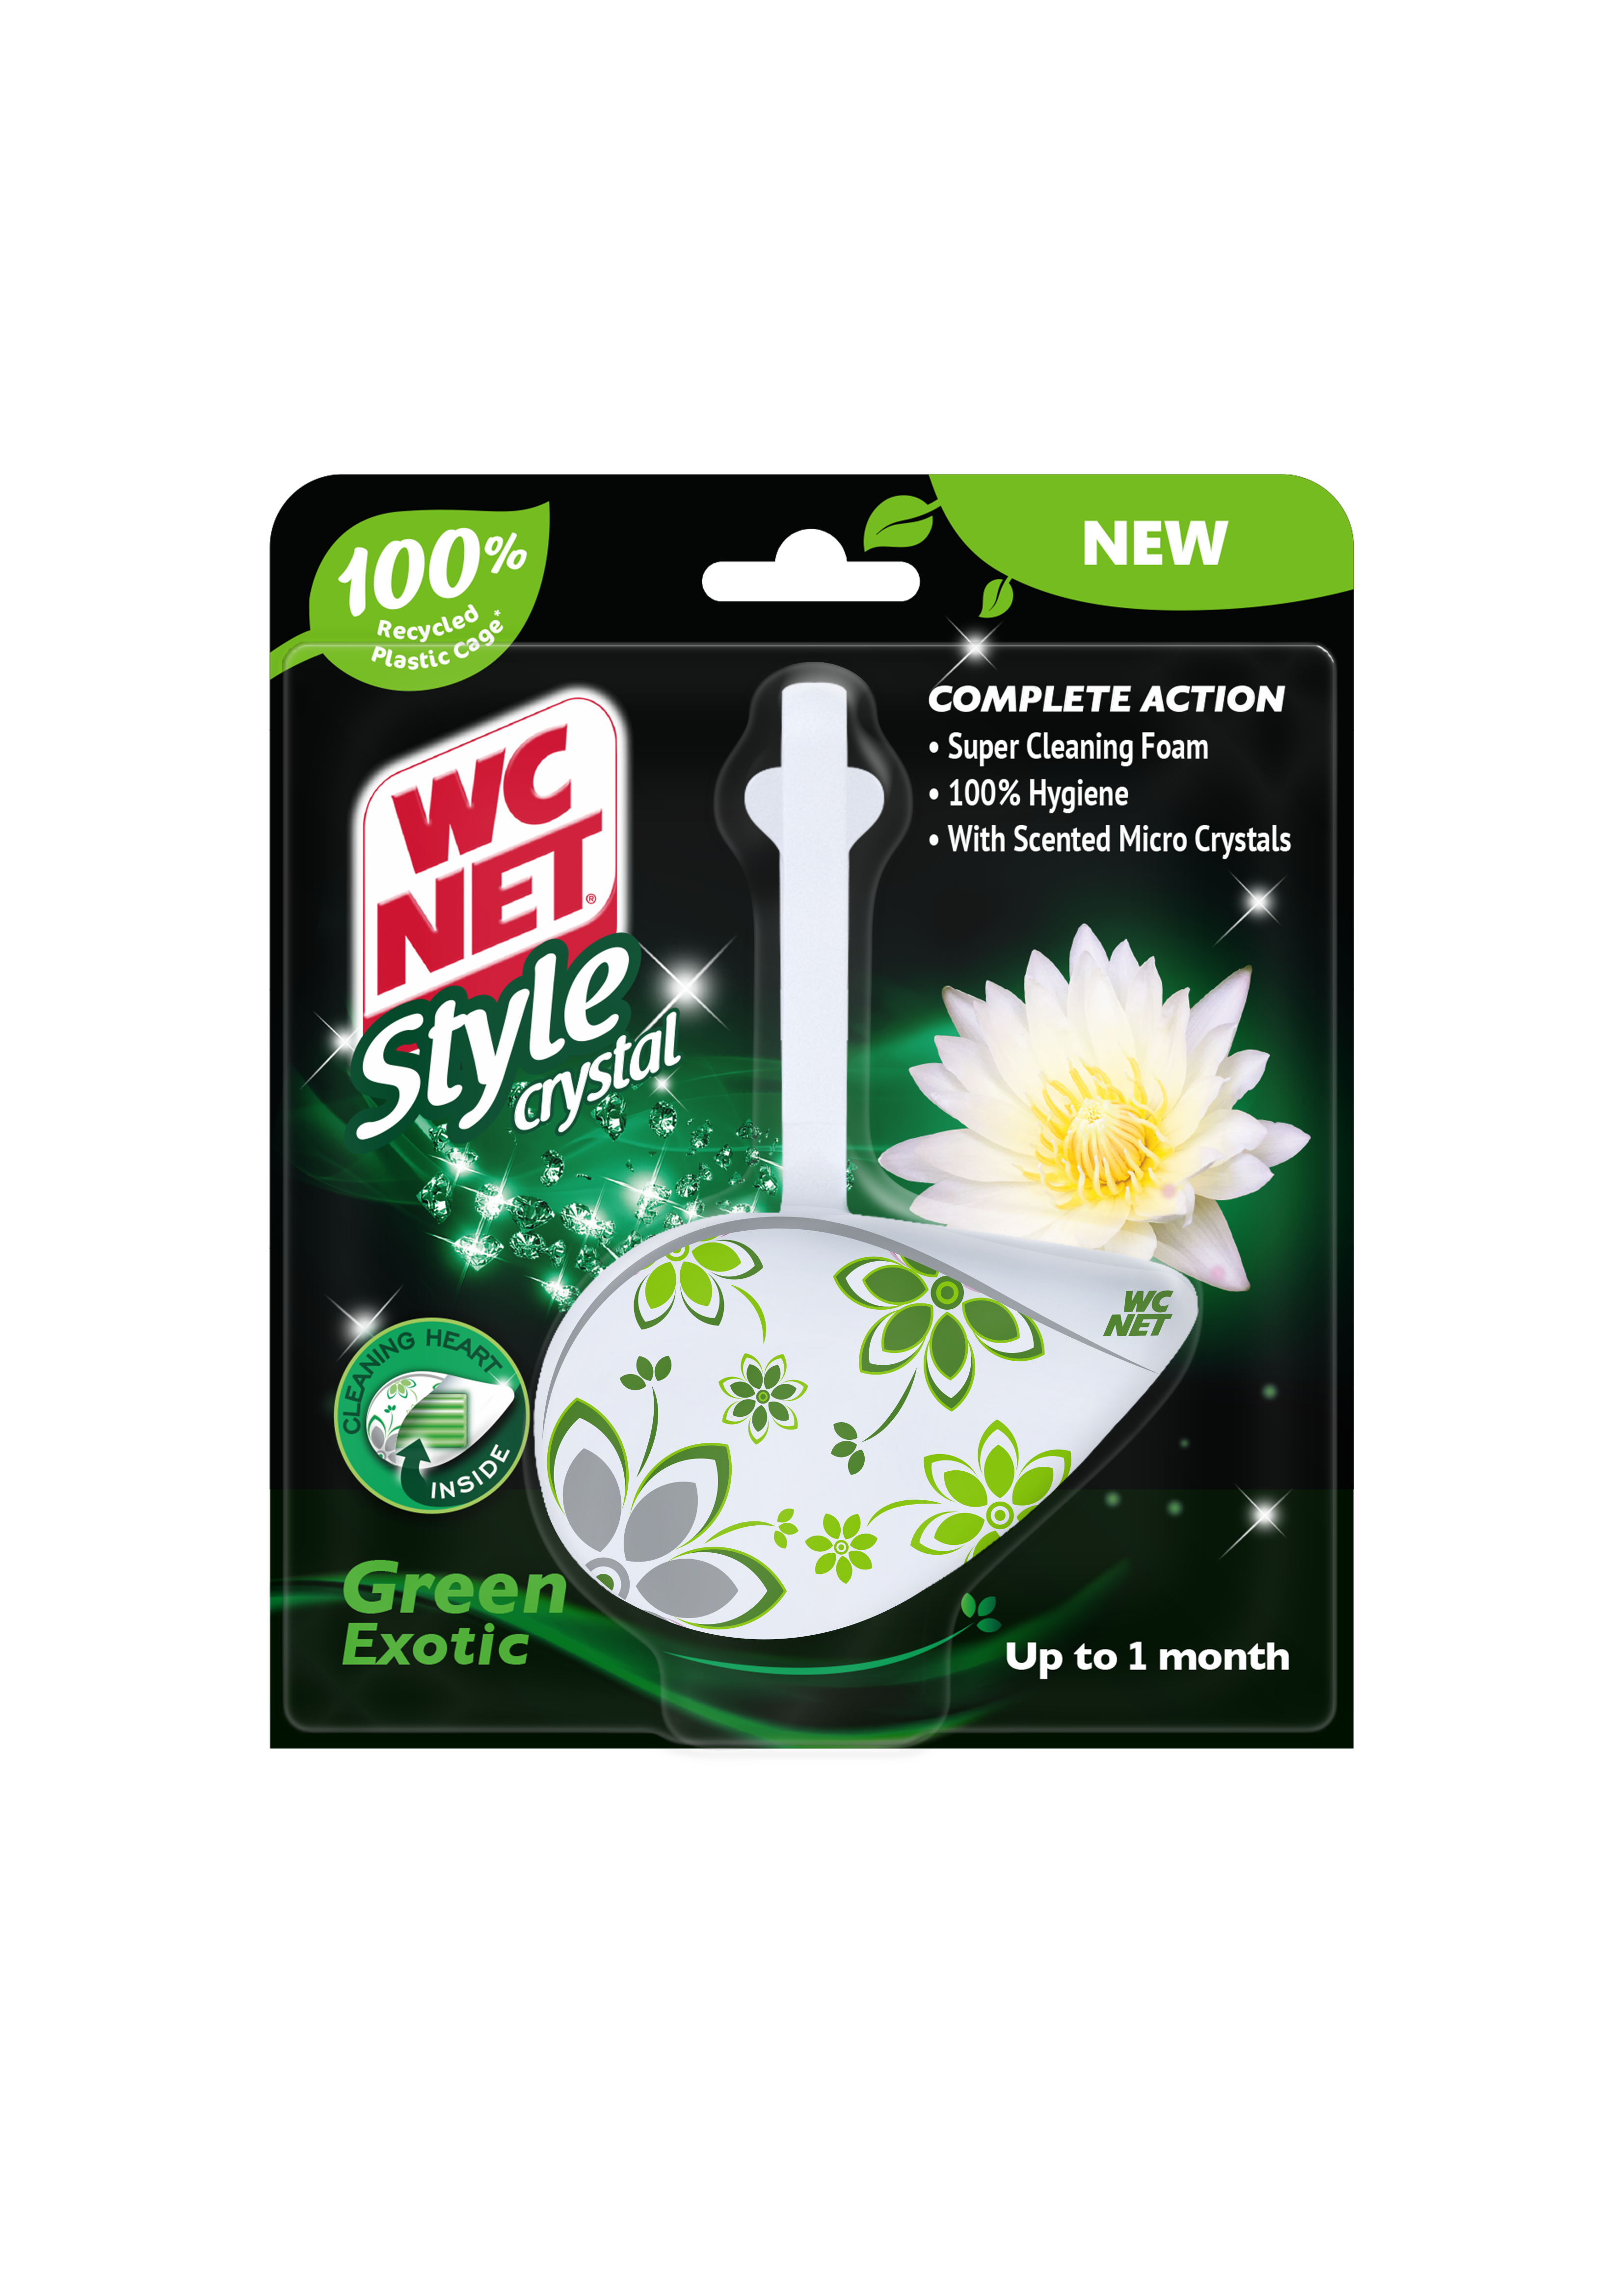 WC NET STYLE CRYSTAL Green Exotic